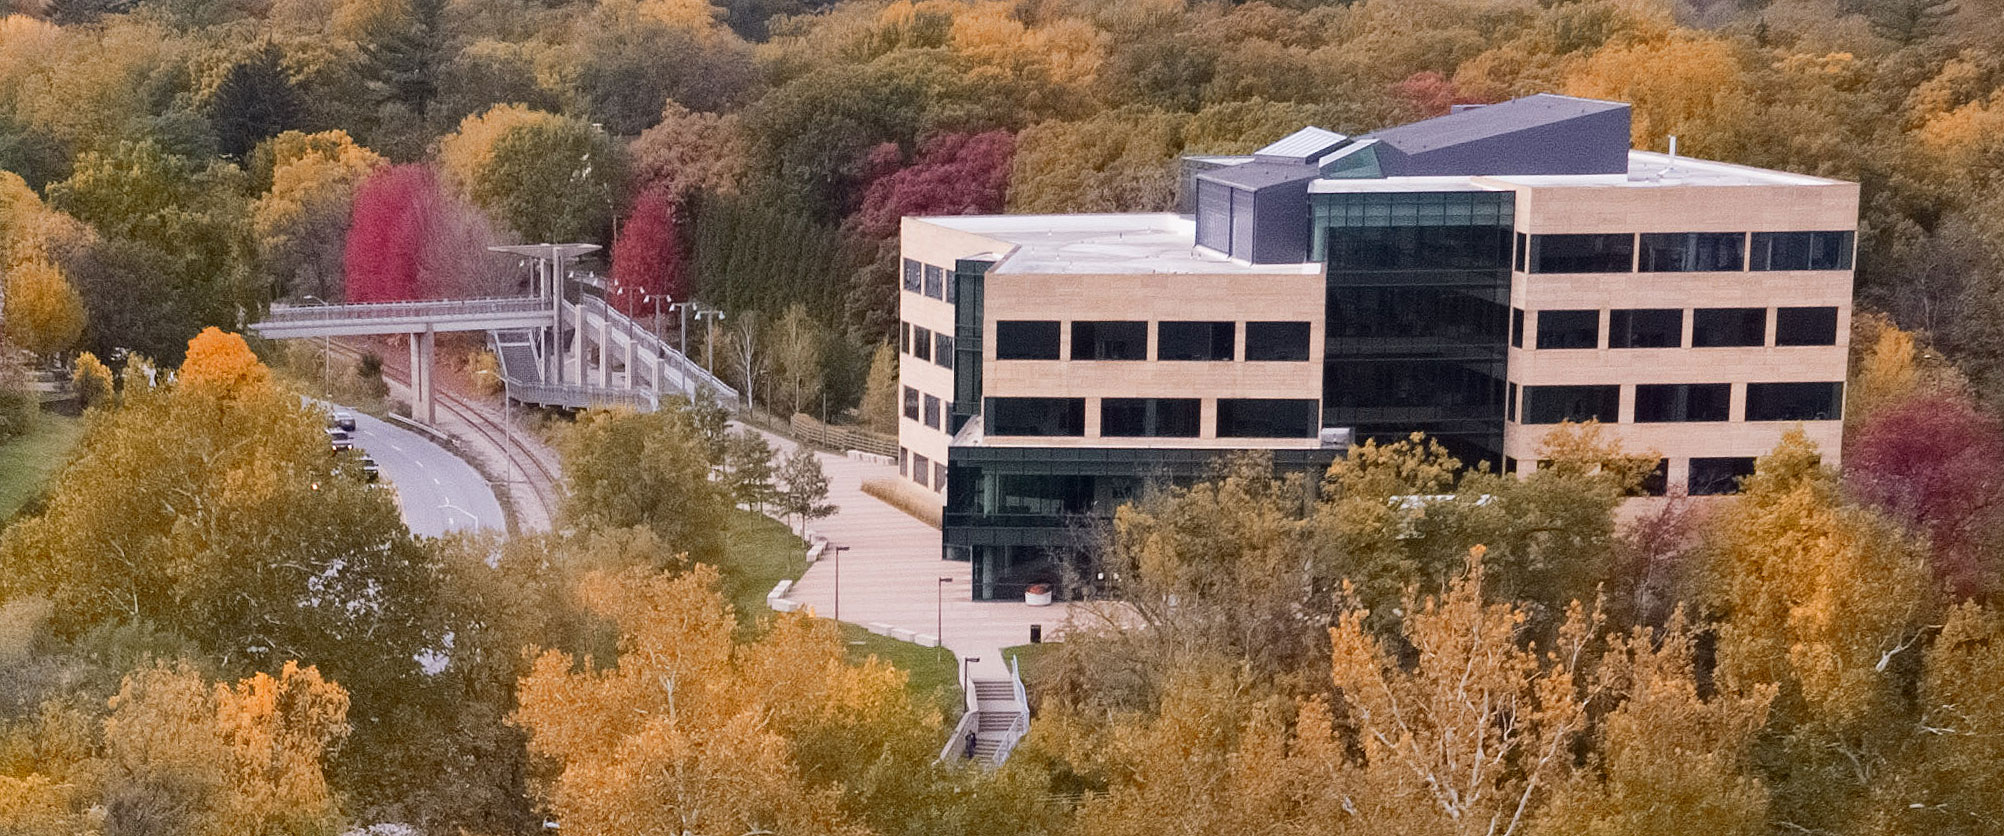 College of Public Health Building in the Fall